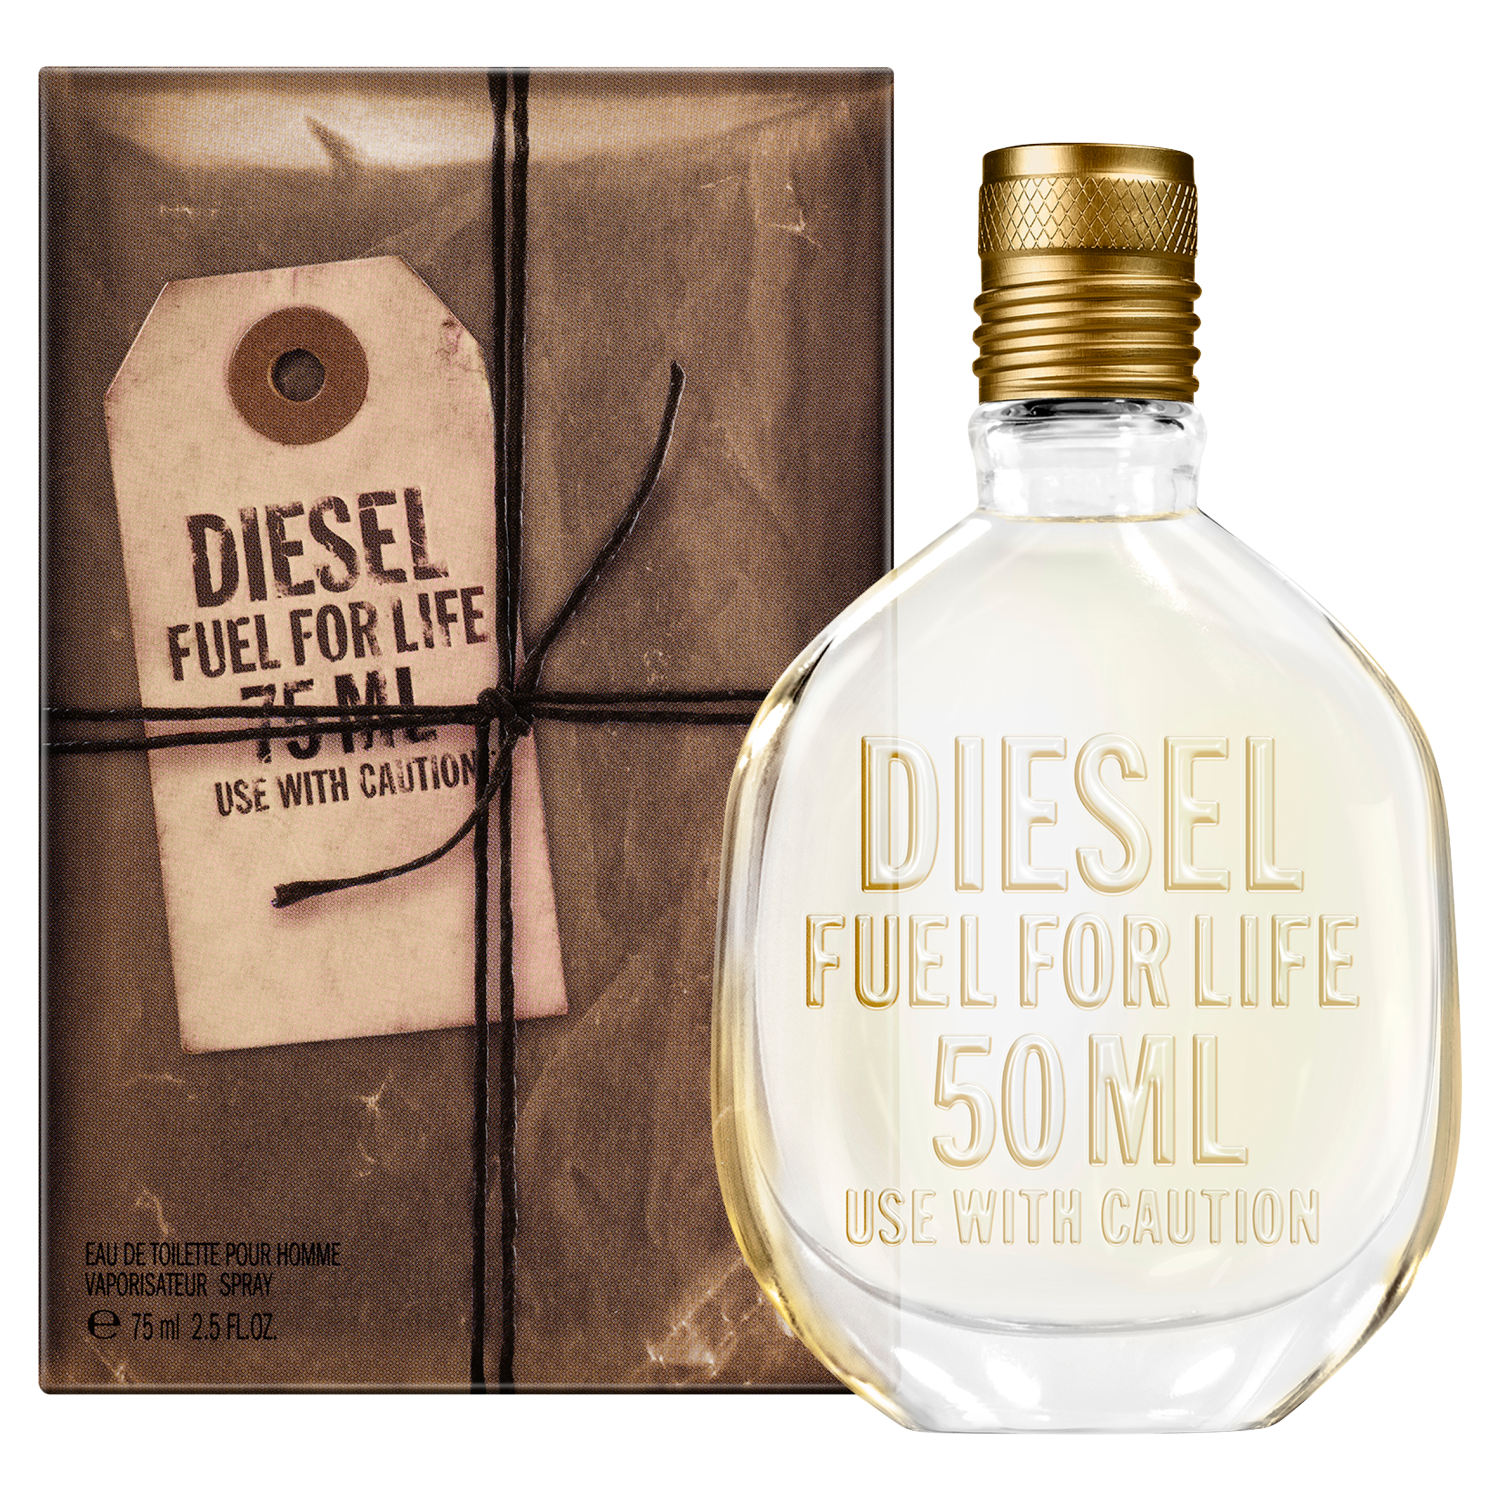 Мужская туалетная вода Diesel Fuel For Life Homme, 50 мл cdlla154s082 dlla157s067 dlla140s224 cdlla155s529 cdlla154sn080 dlla155s054 dlla154s304c5 diesel fuel injection nozzle for sale